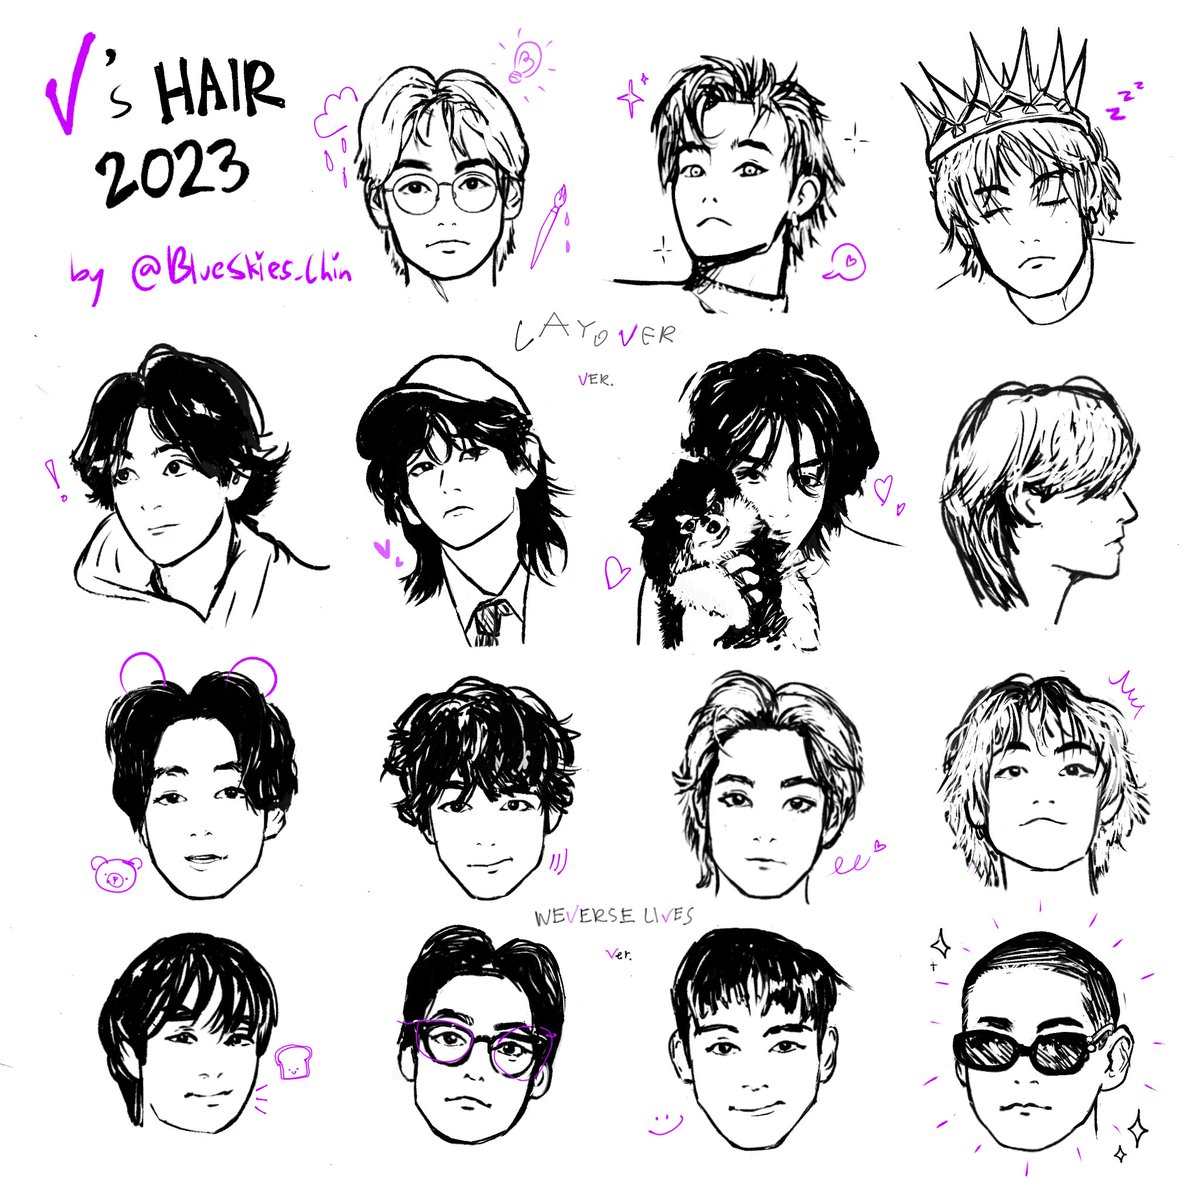 Taehyung's haircut/hairstyles in 2023 🐻💞
which one is your favorite? 

#btsfanart #taehyung #HappyBirthdayTaehyung #HAPPYVDAY